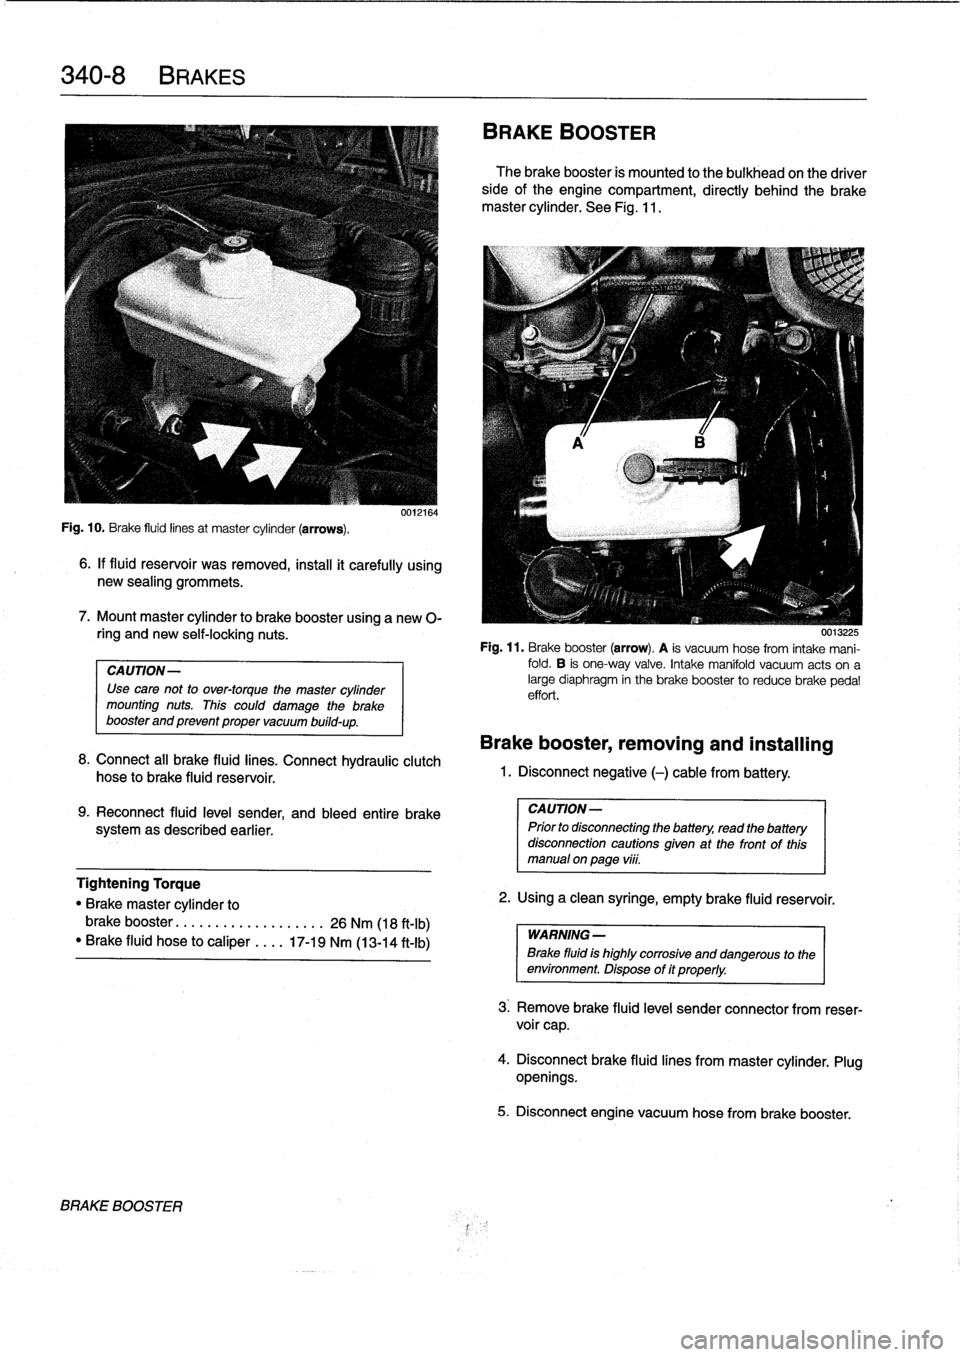 BMW 328i 1997 E36 Owners Guide 
340-
8
BRAKES

Fig
.
10
.
Brake
fluid
linesat
master
cylinder
(arrows)
.

6
.
If
fluid
reservoir
was
removed,
install
it
carefully
using
new
sealing
grommets
.

7
.
Mount
master
cylinder
to
brake
boo